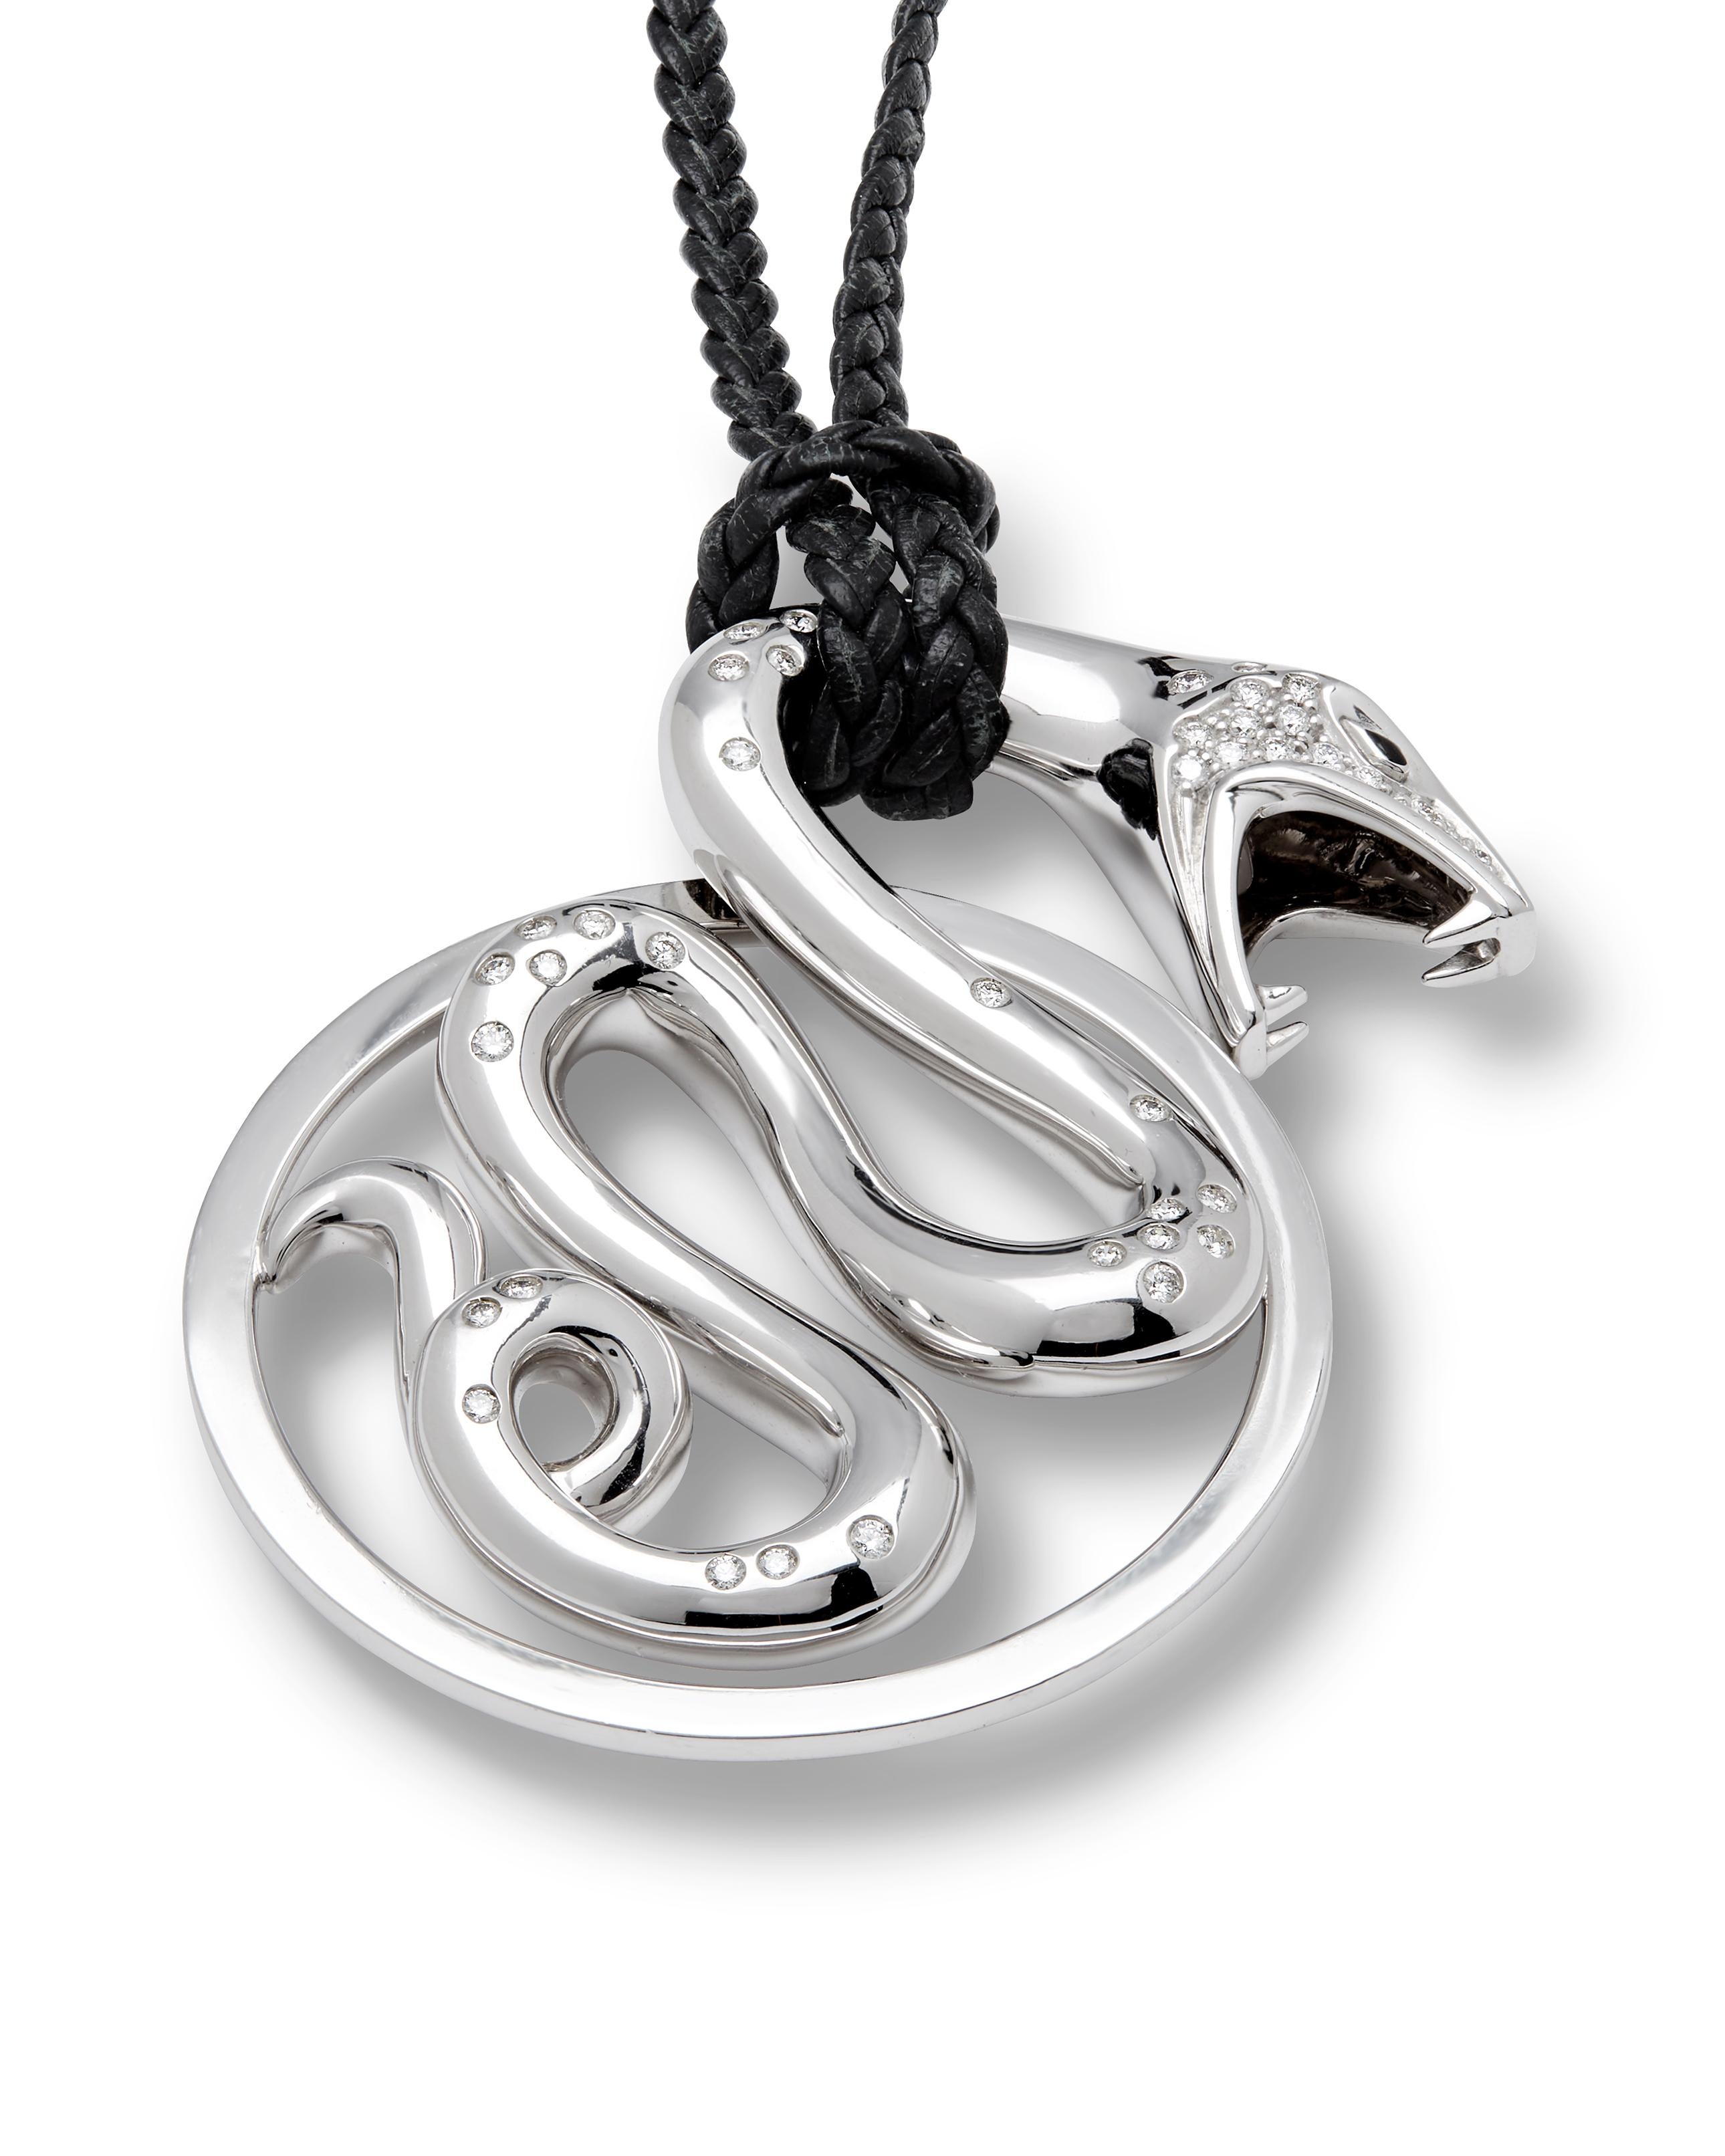 Boucheron Trouble large white gold and diamond pendant, with original braided black cord, pre-owned but in New condition. 

The Serpent, a symbol of protection, and an iconic design from the Maison Boucheron, part of the iconic animal collection,